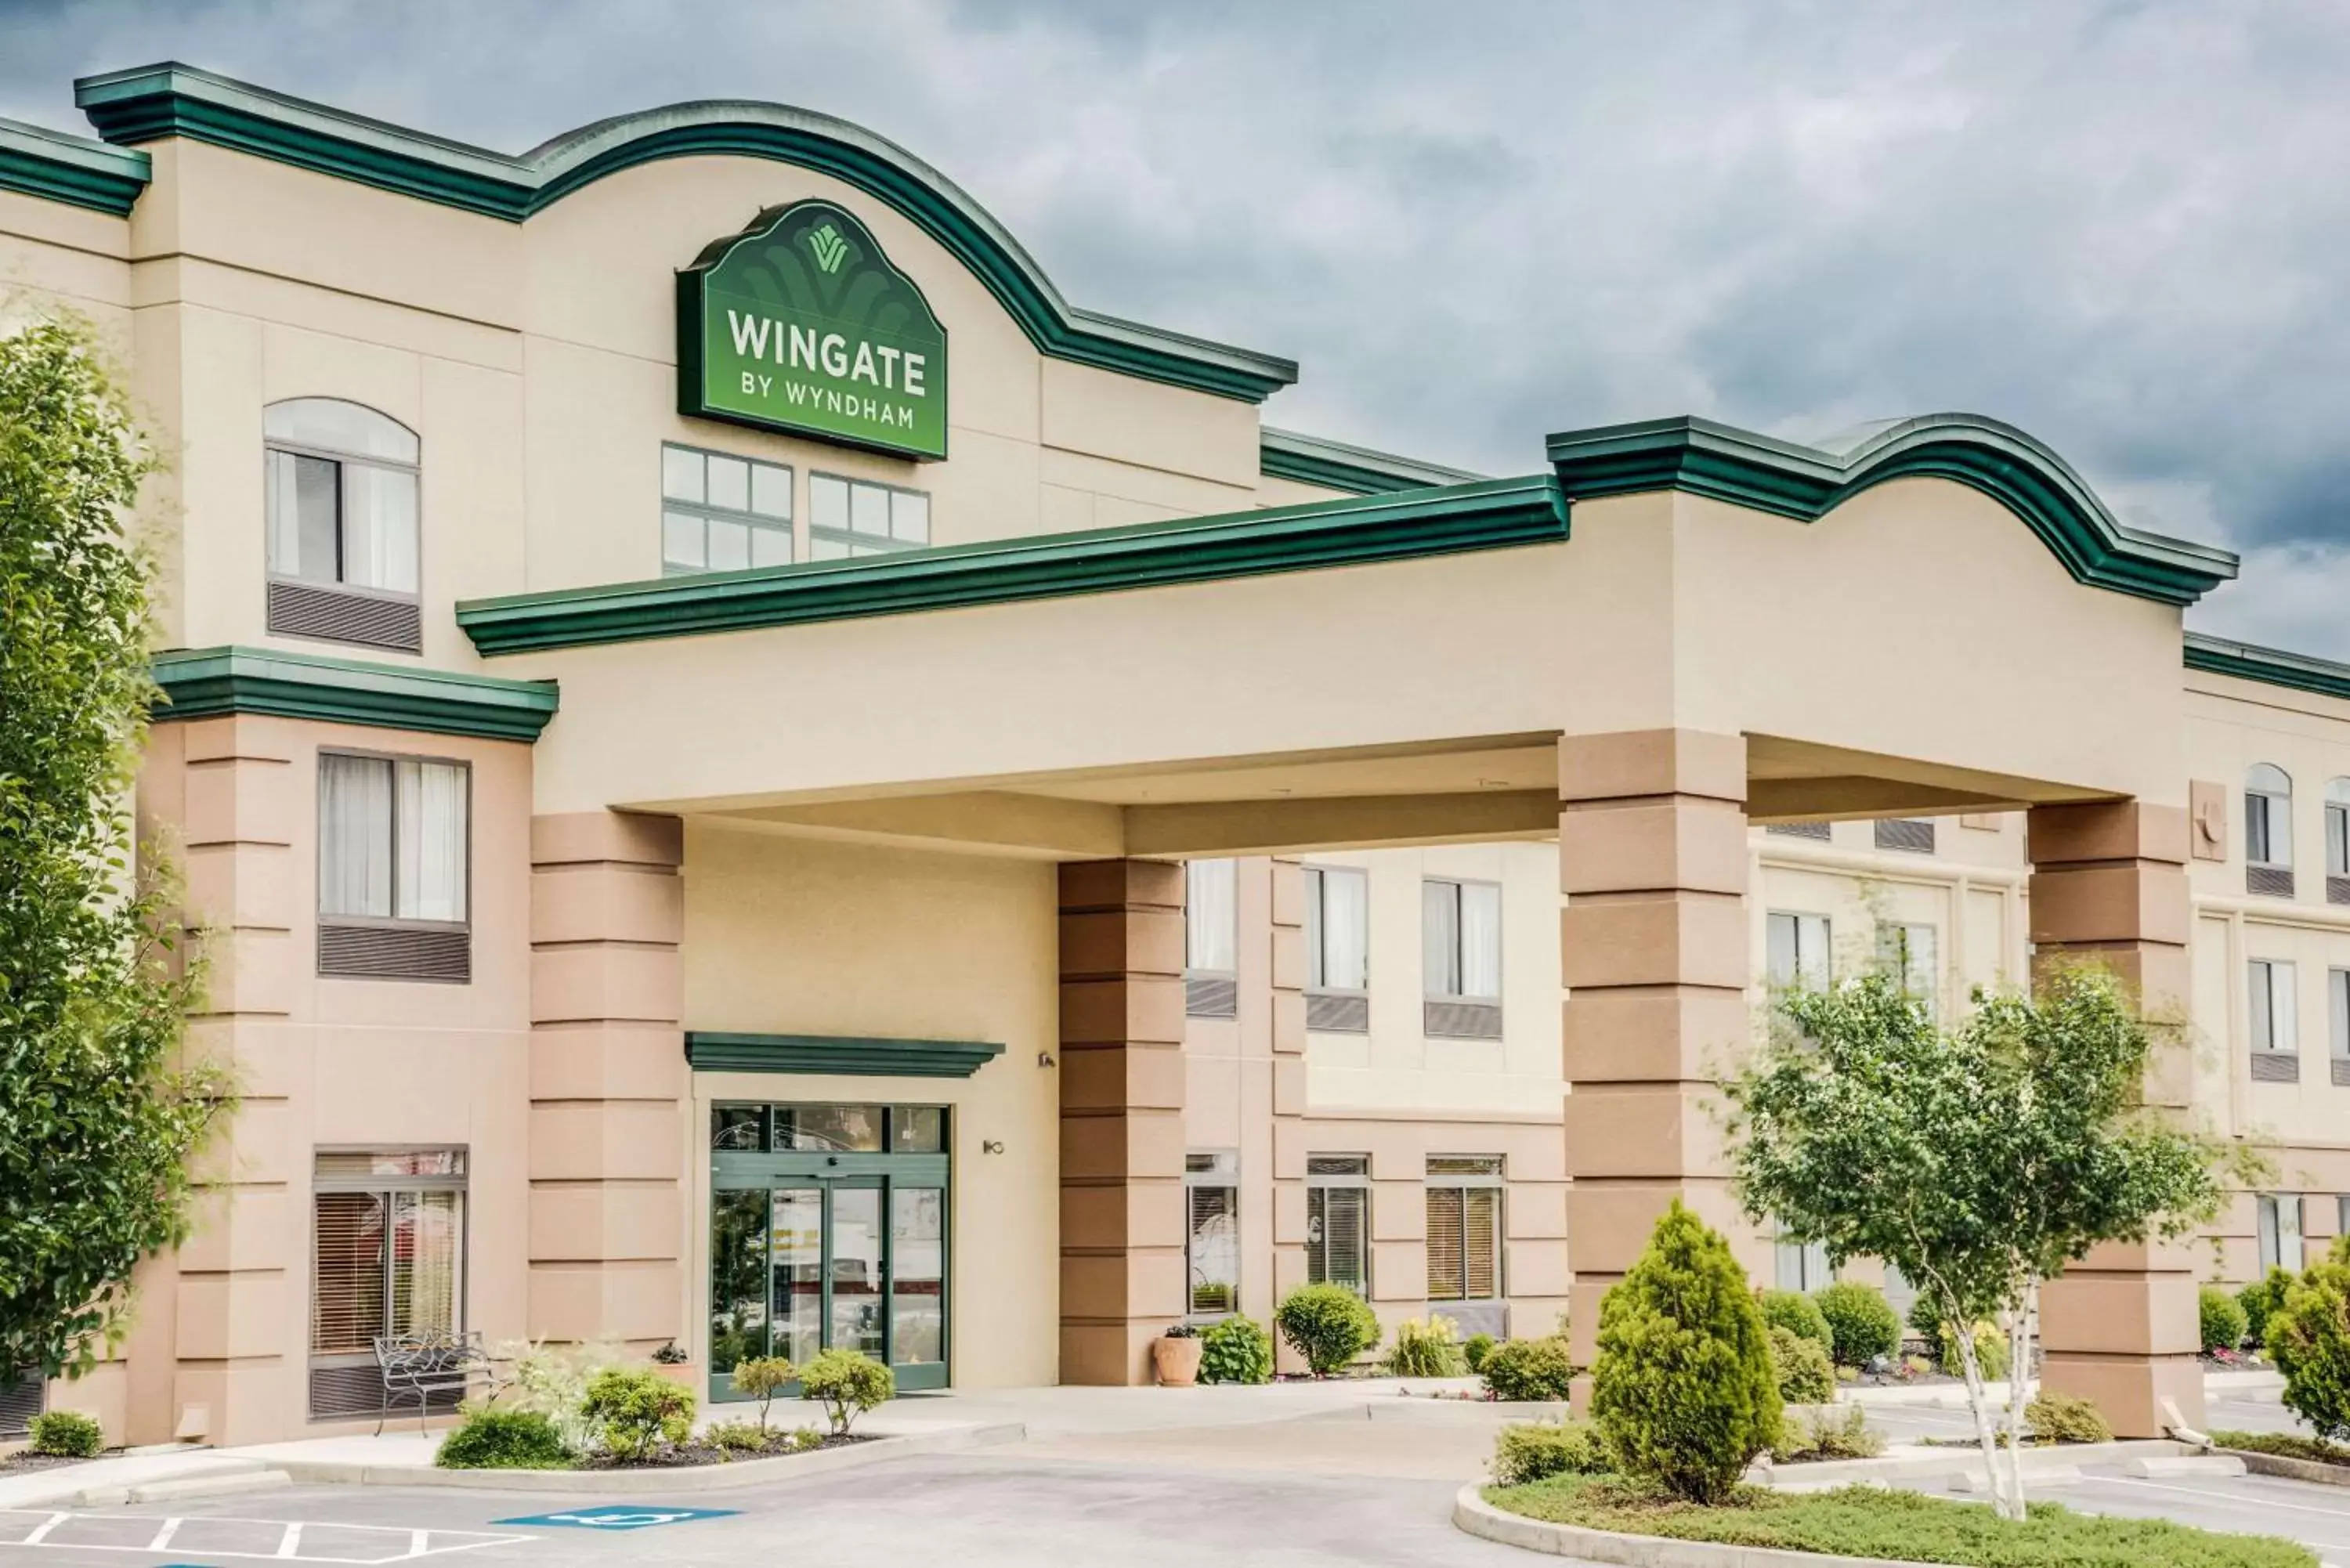 Property building in Wingate by Wyndham - York